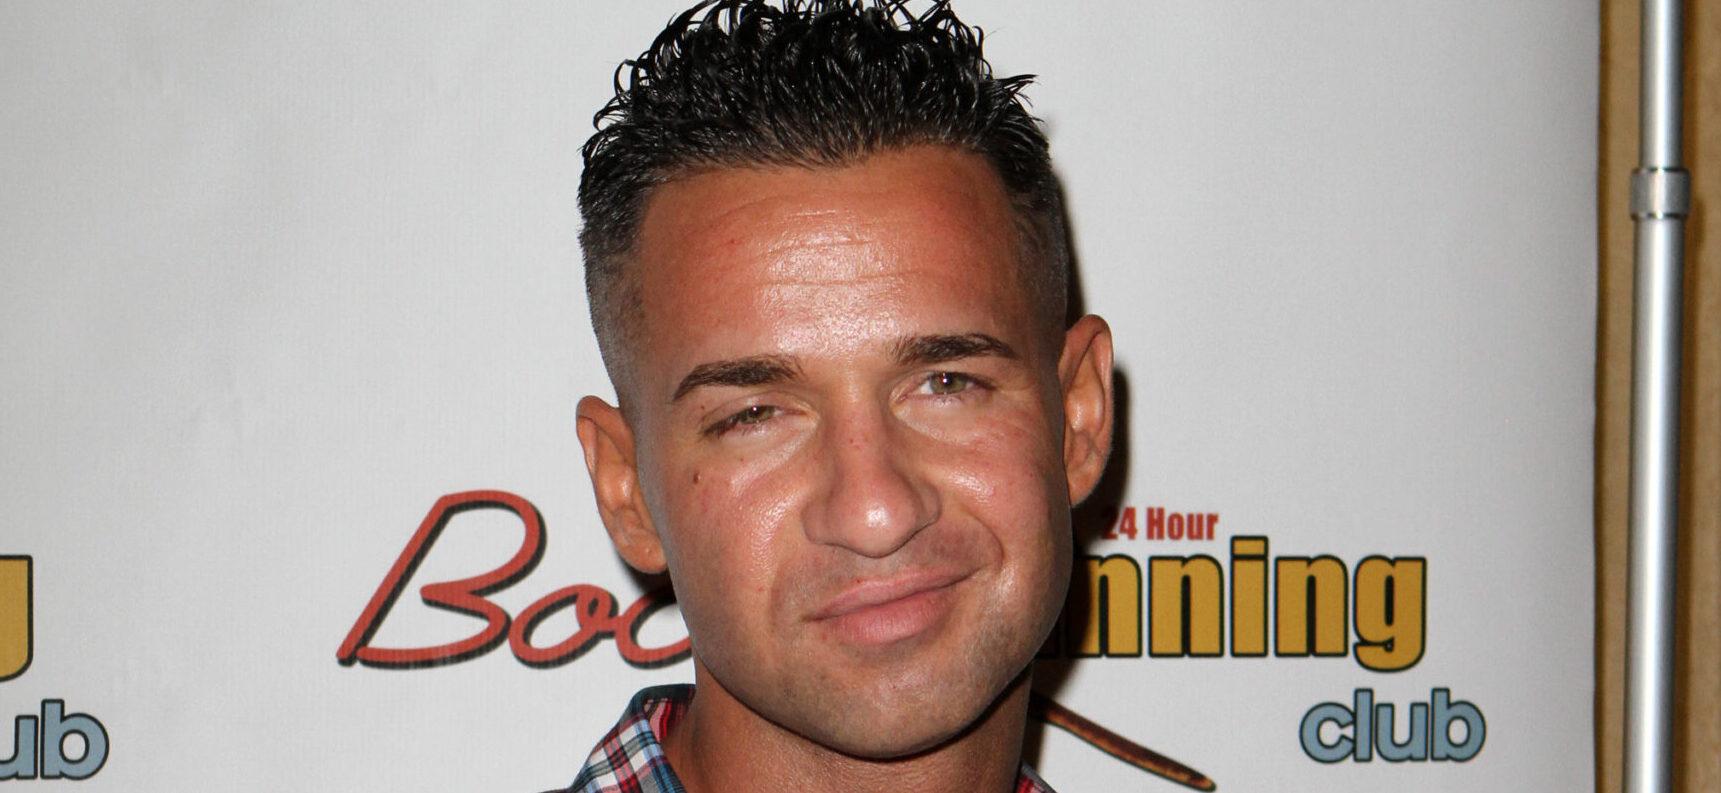 Jersey Shore's Mike "The Situation" Sorrentino poses at the opening Boca Tanning Club in Miami